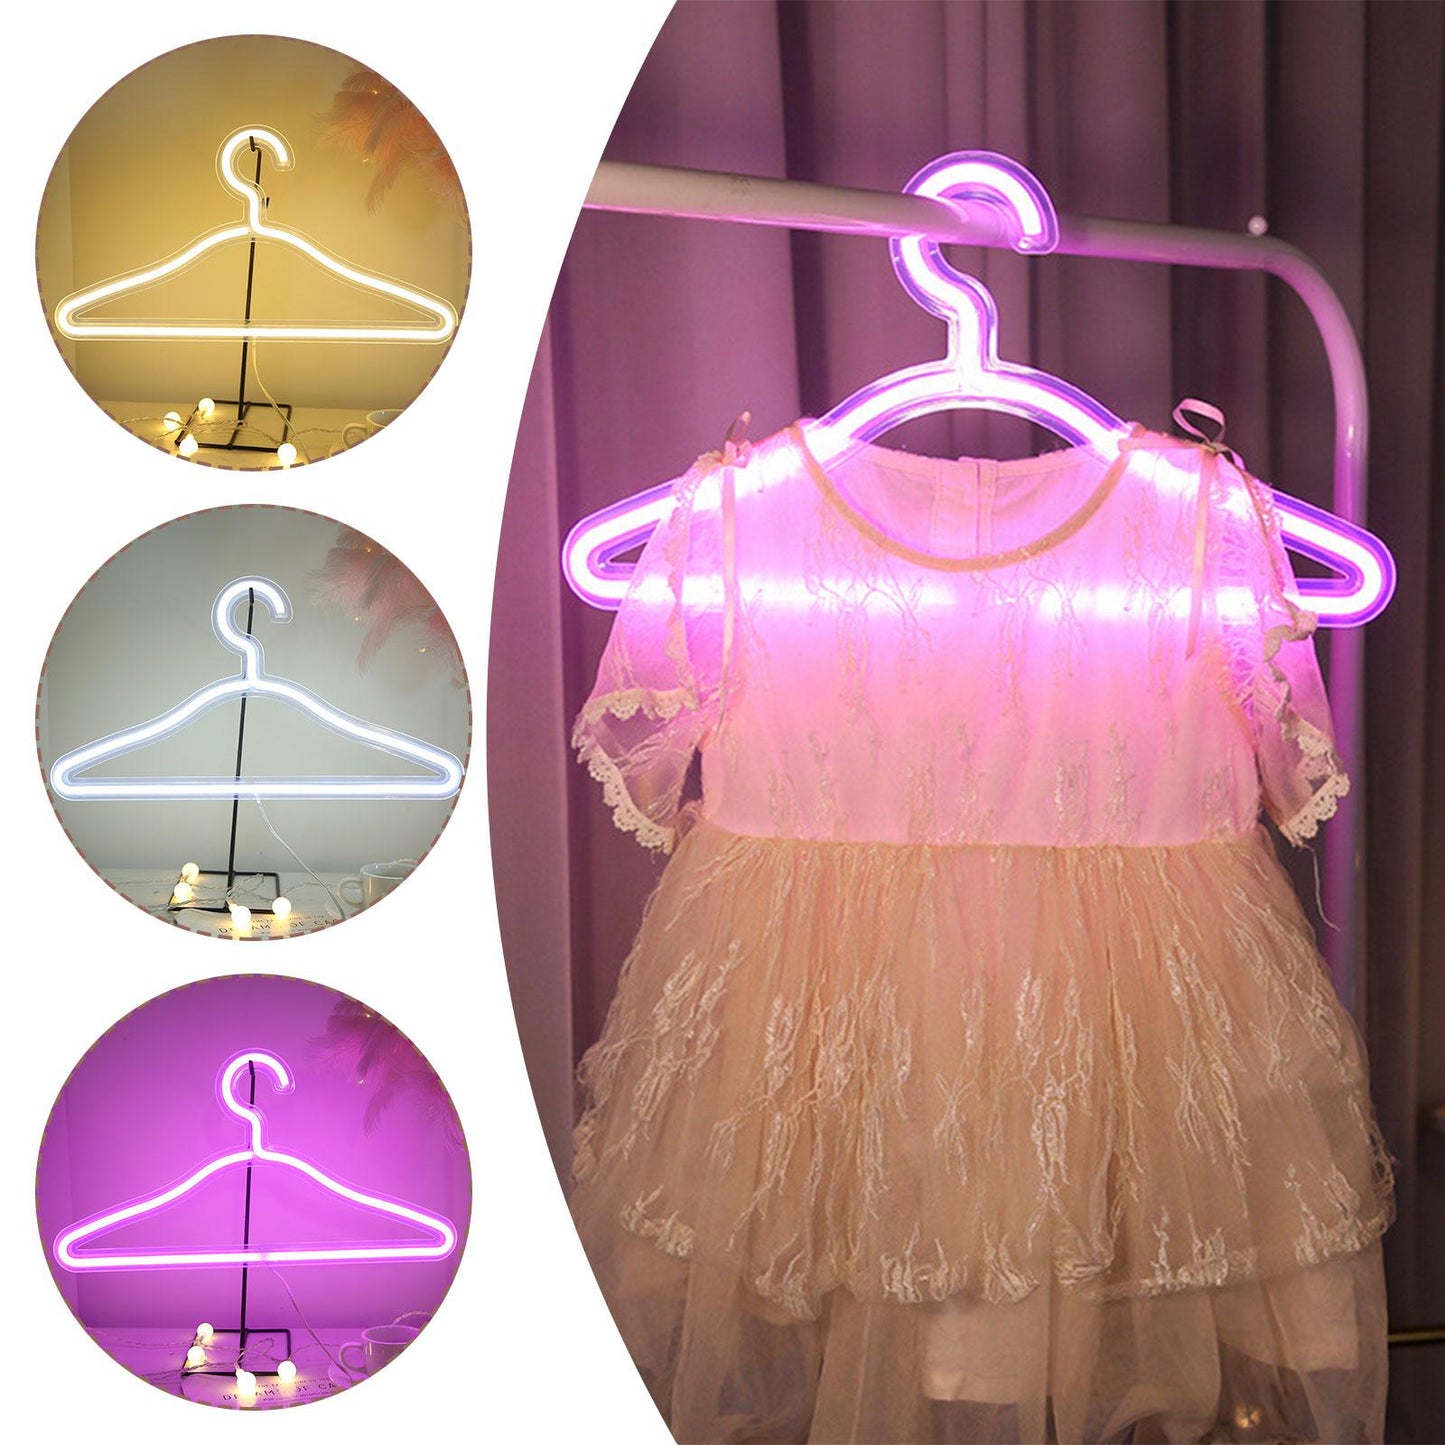 LED Hanger Neon Light Sign Glow Clothes Display Stand USB Powered For Home Decor